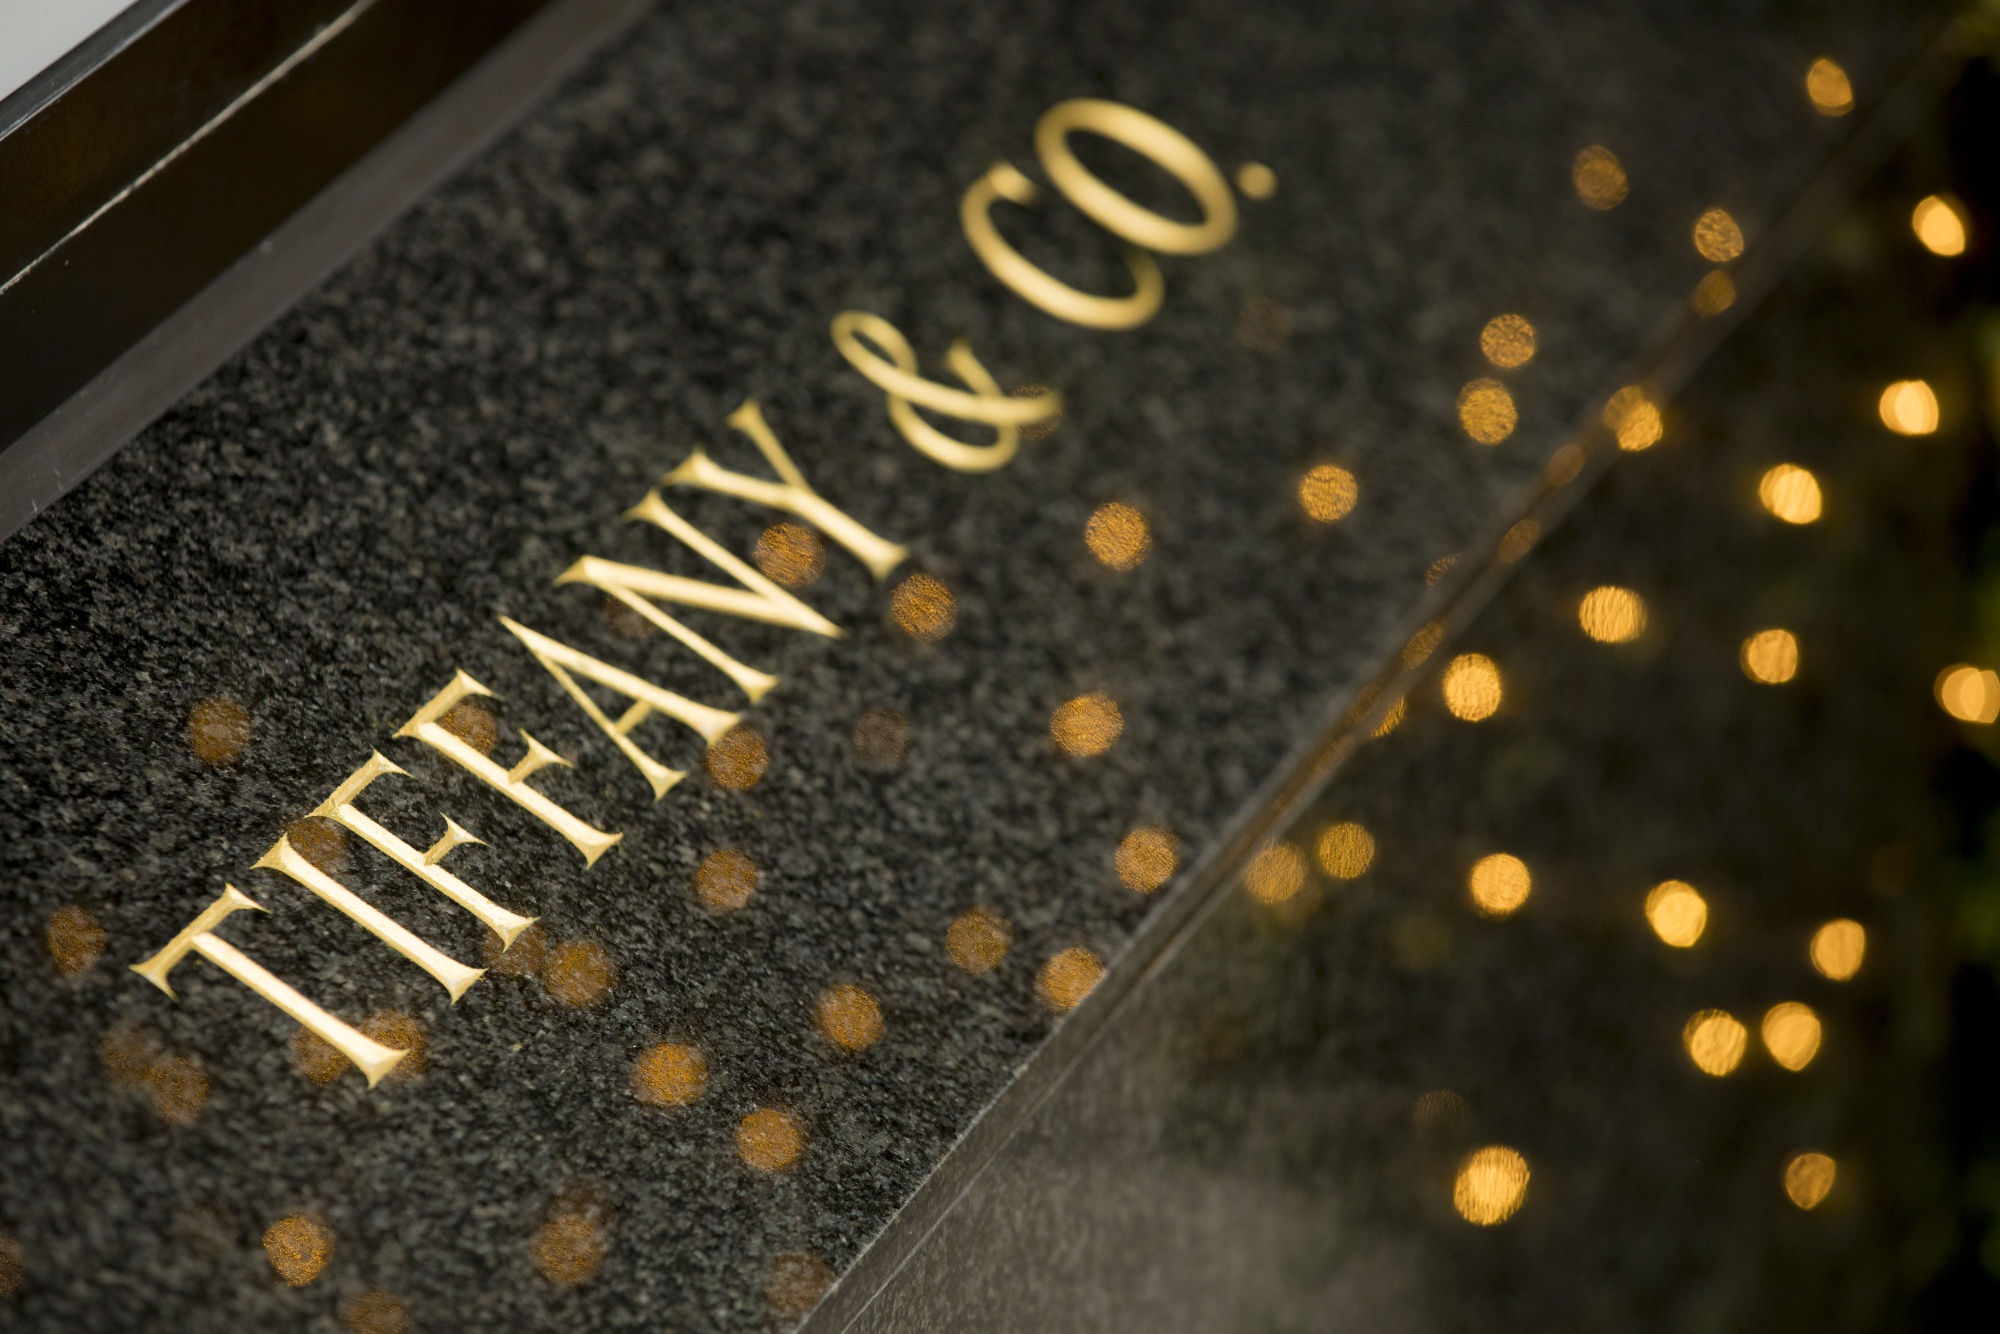 Declassified: LVMH / Tiffany (XPAR:MC set to acquire NYSE:TIF by mid-year  2021) – HOLD